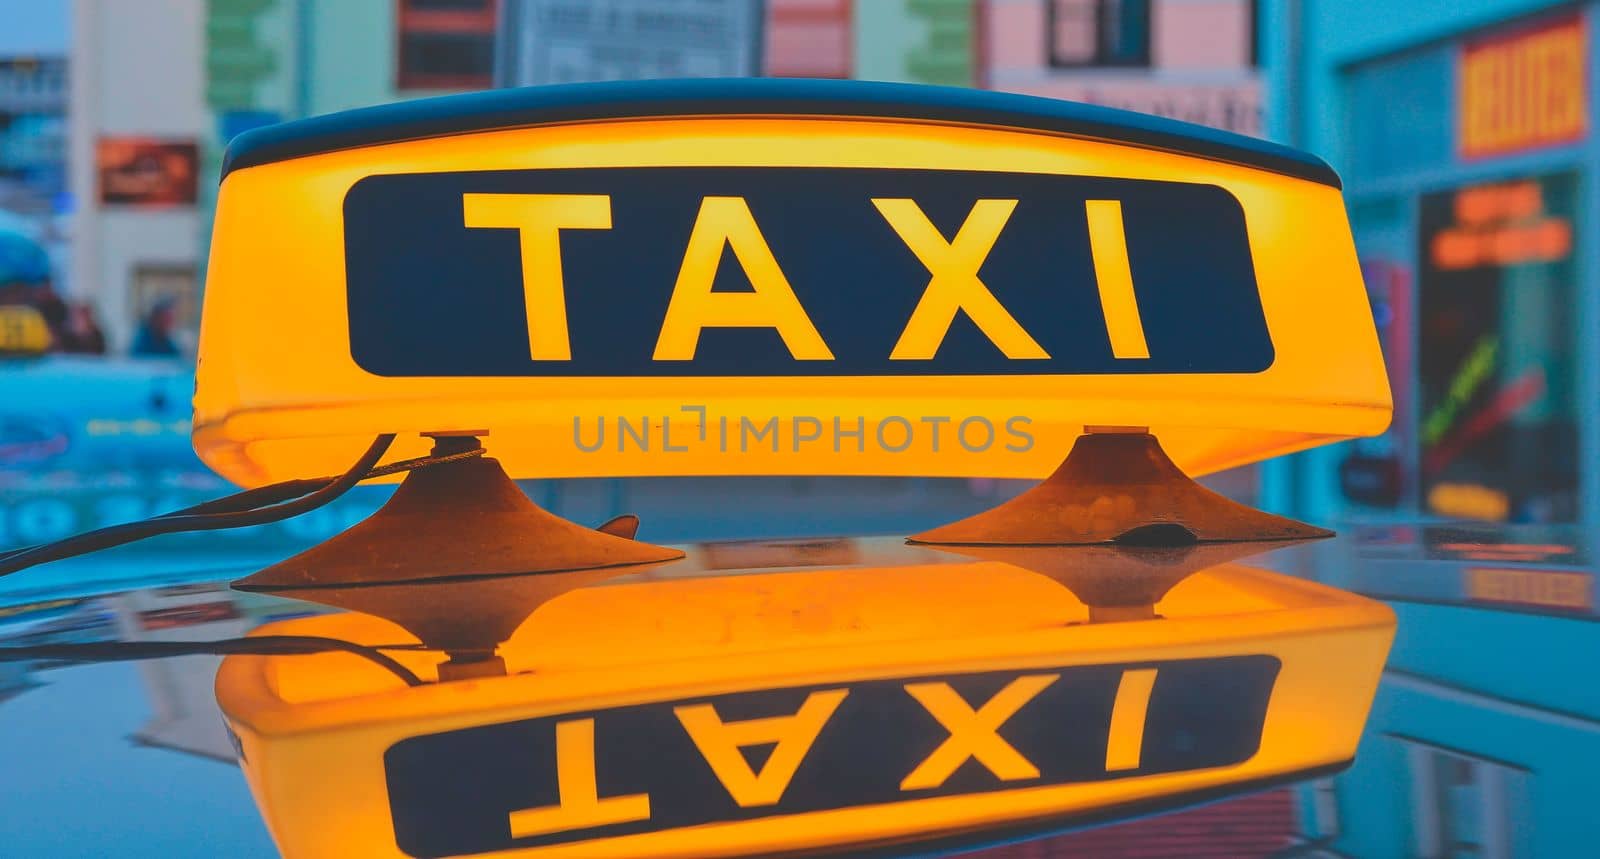 Lit taxi sign on roof of taxi car in the city.